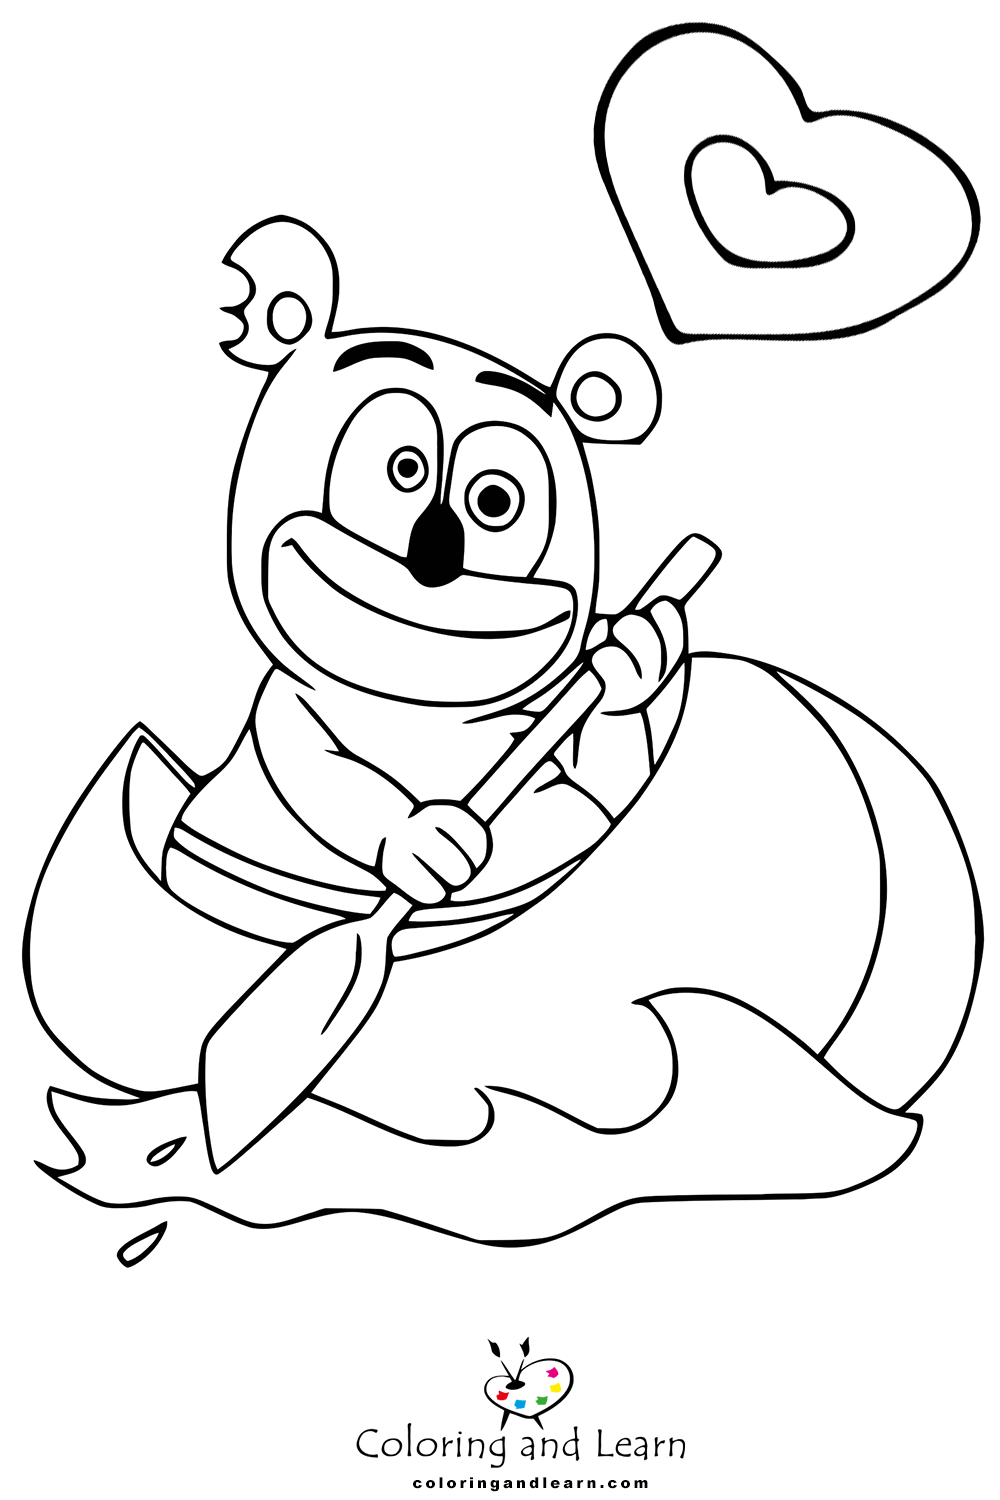 Gummy bear coloring pages